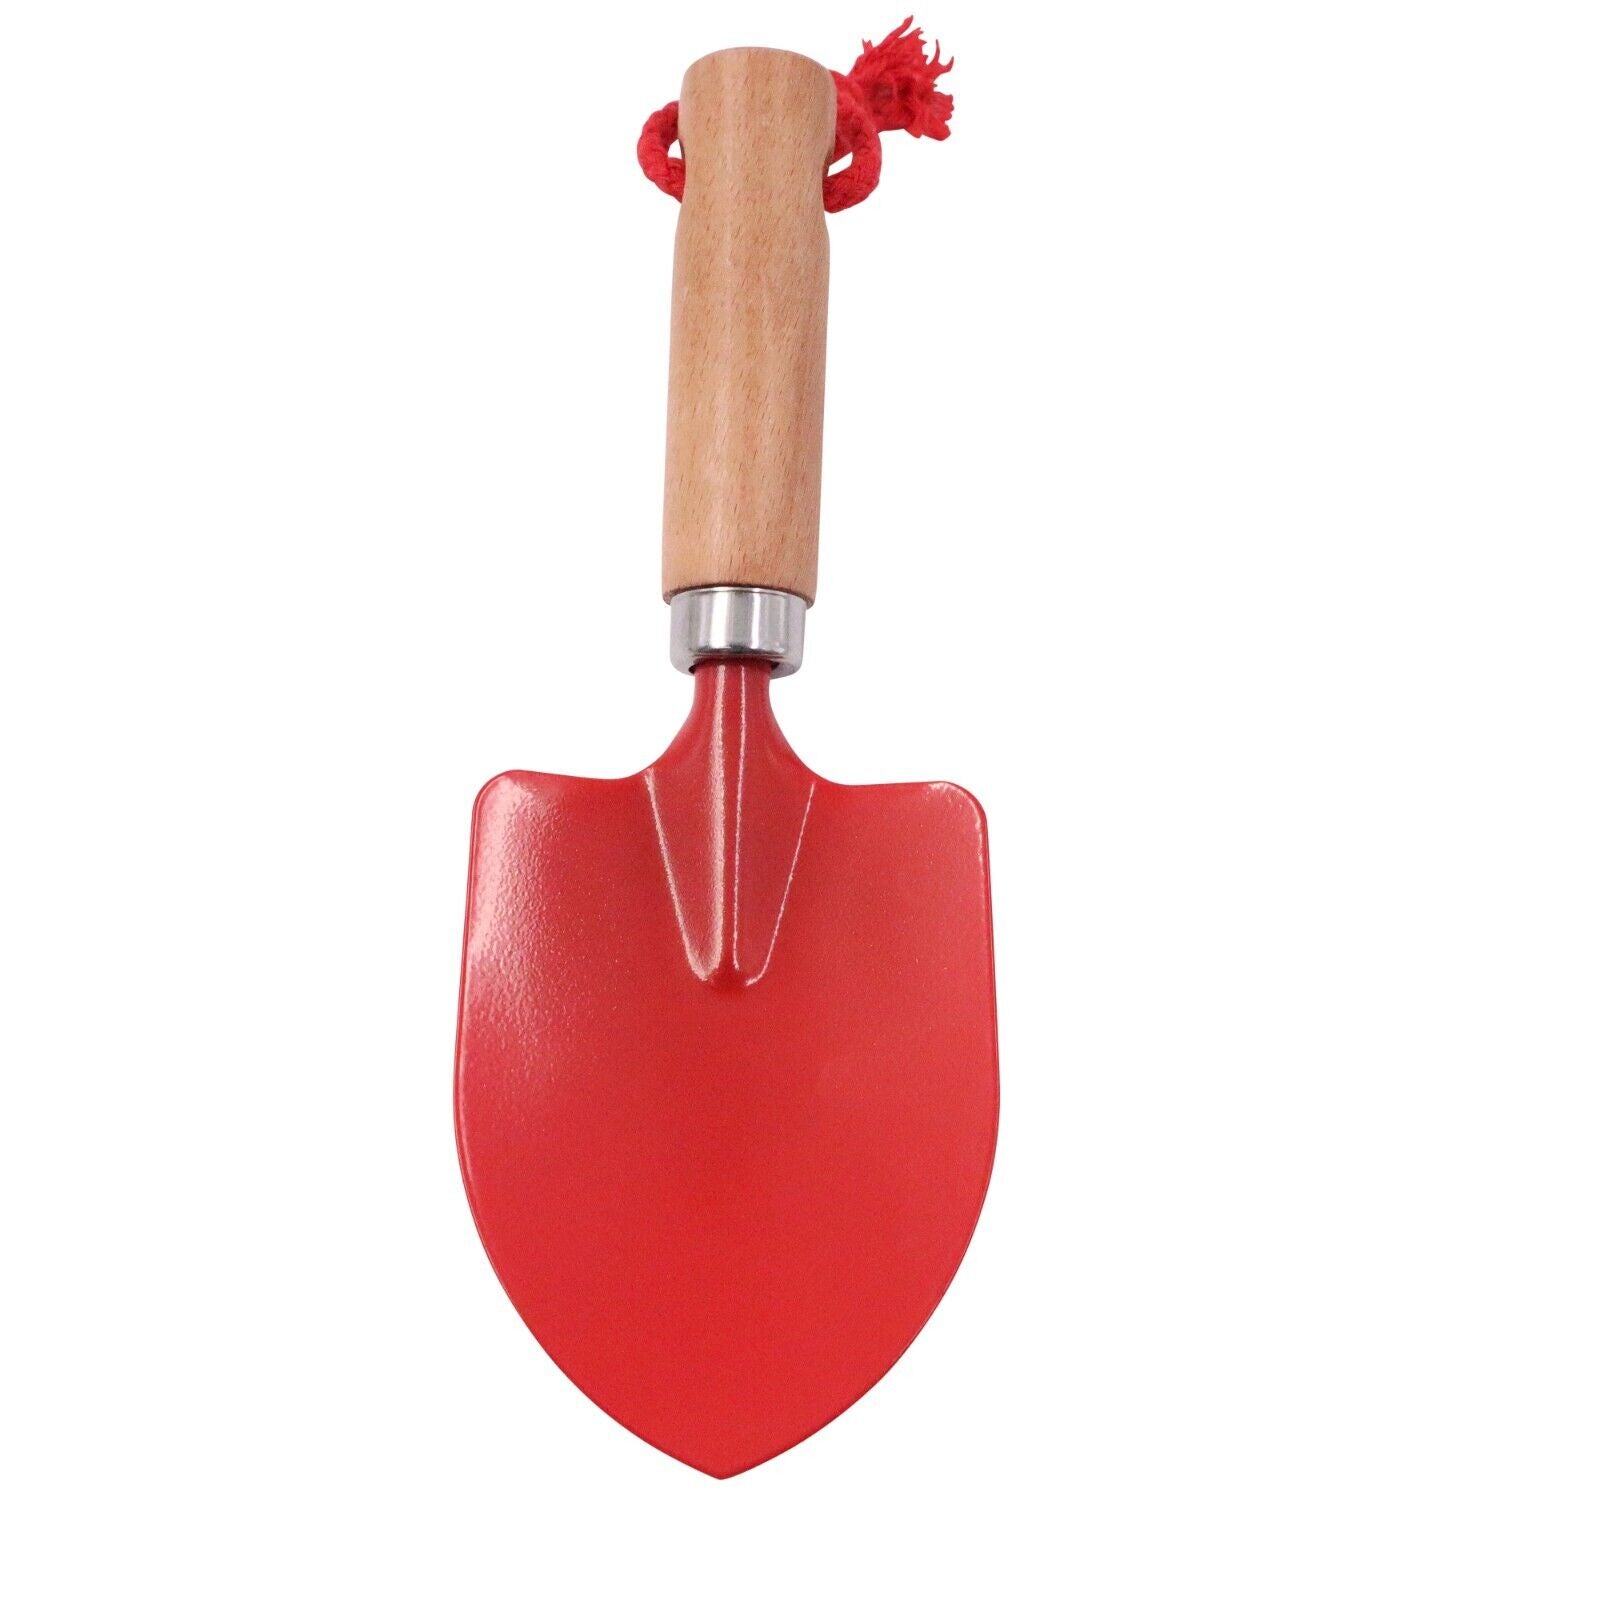 Gardening Tool Set Trowel, Fork and Rake | Learning and Exploring Through Play